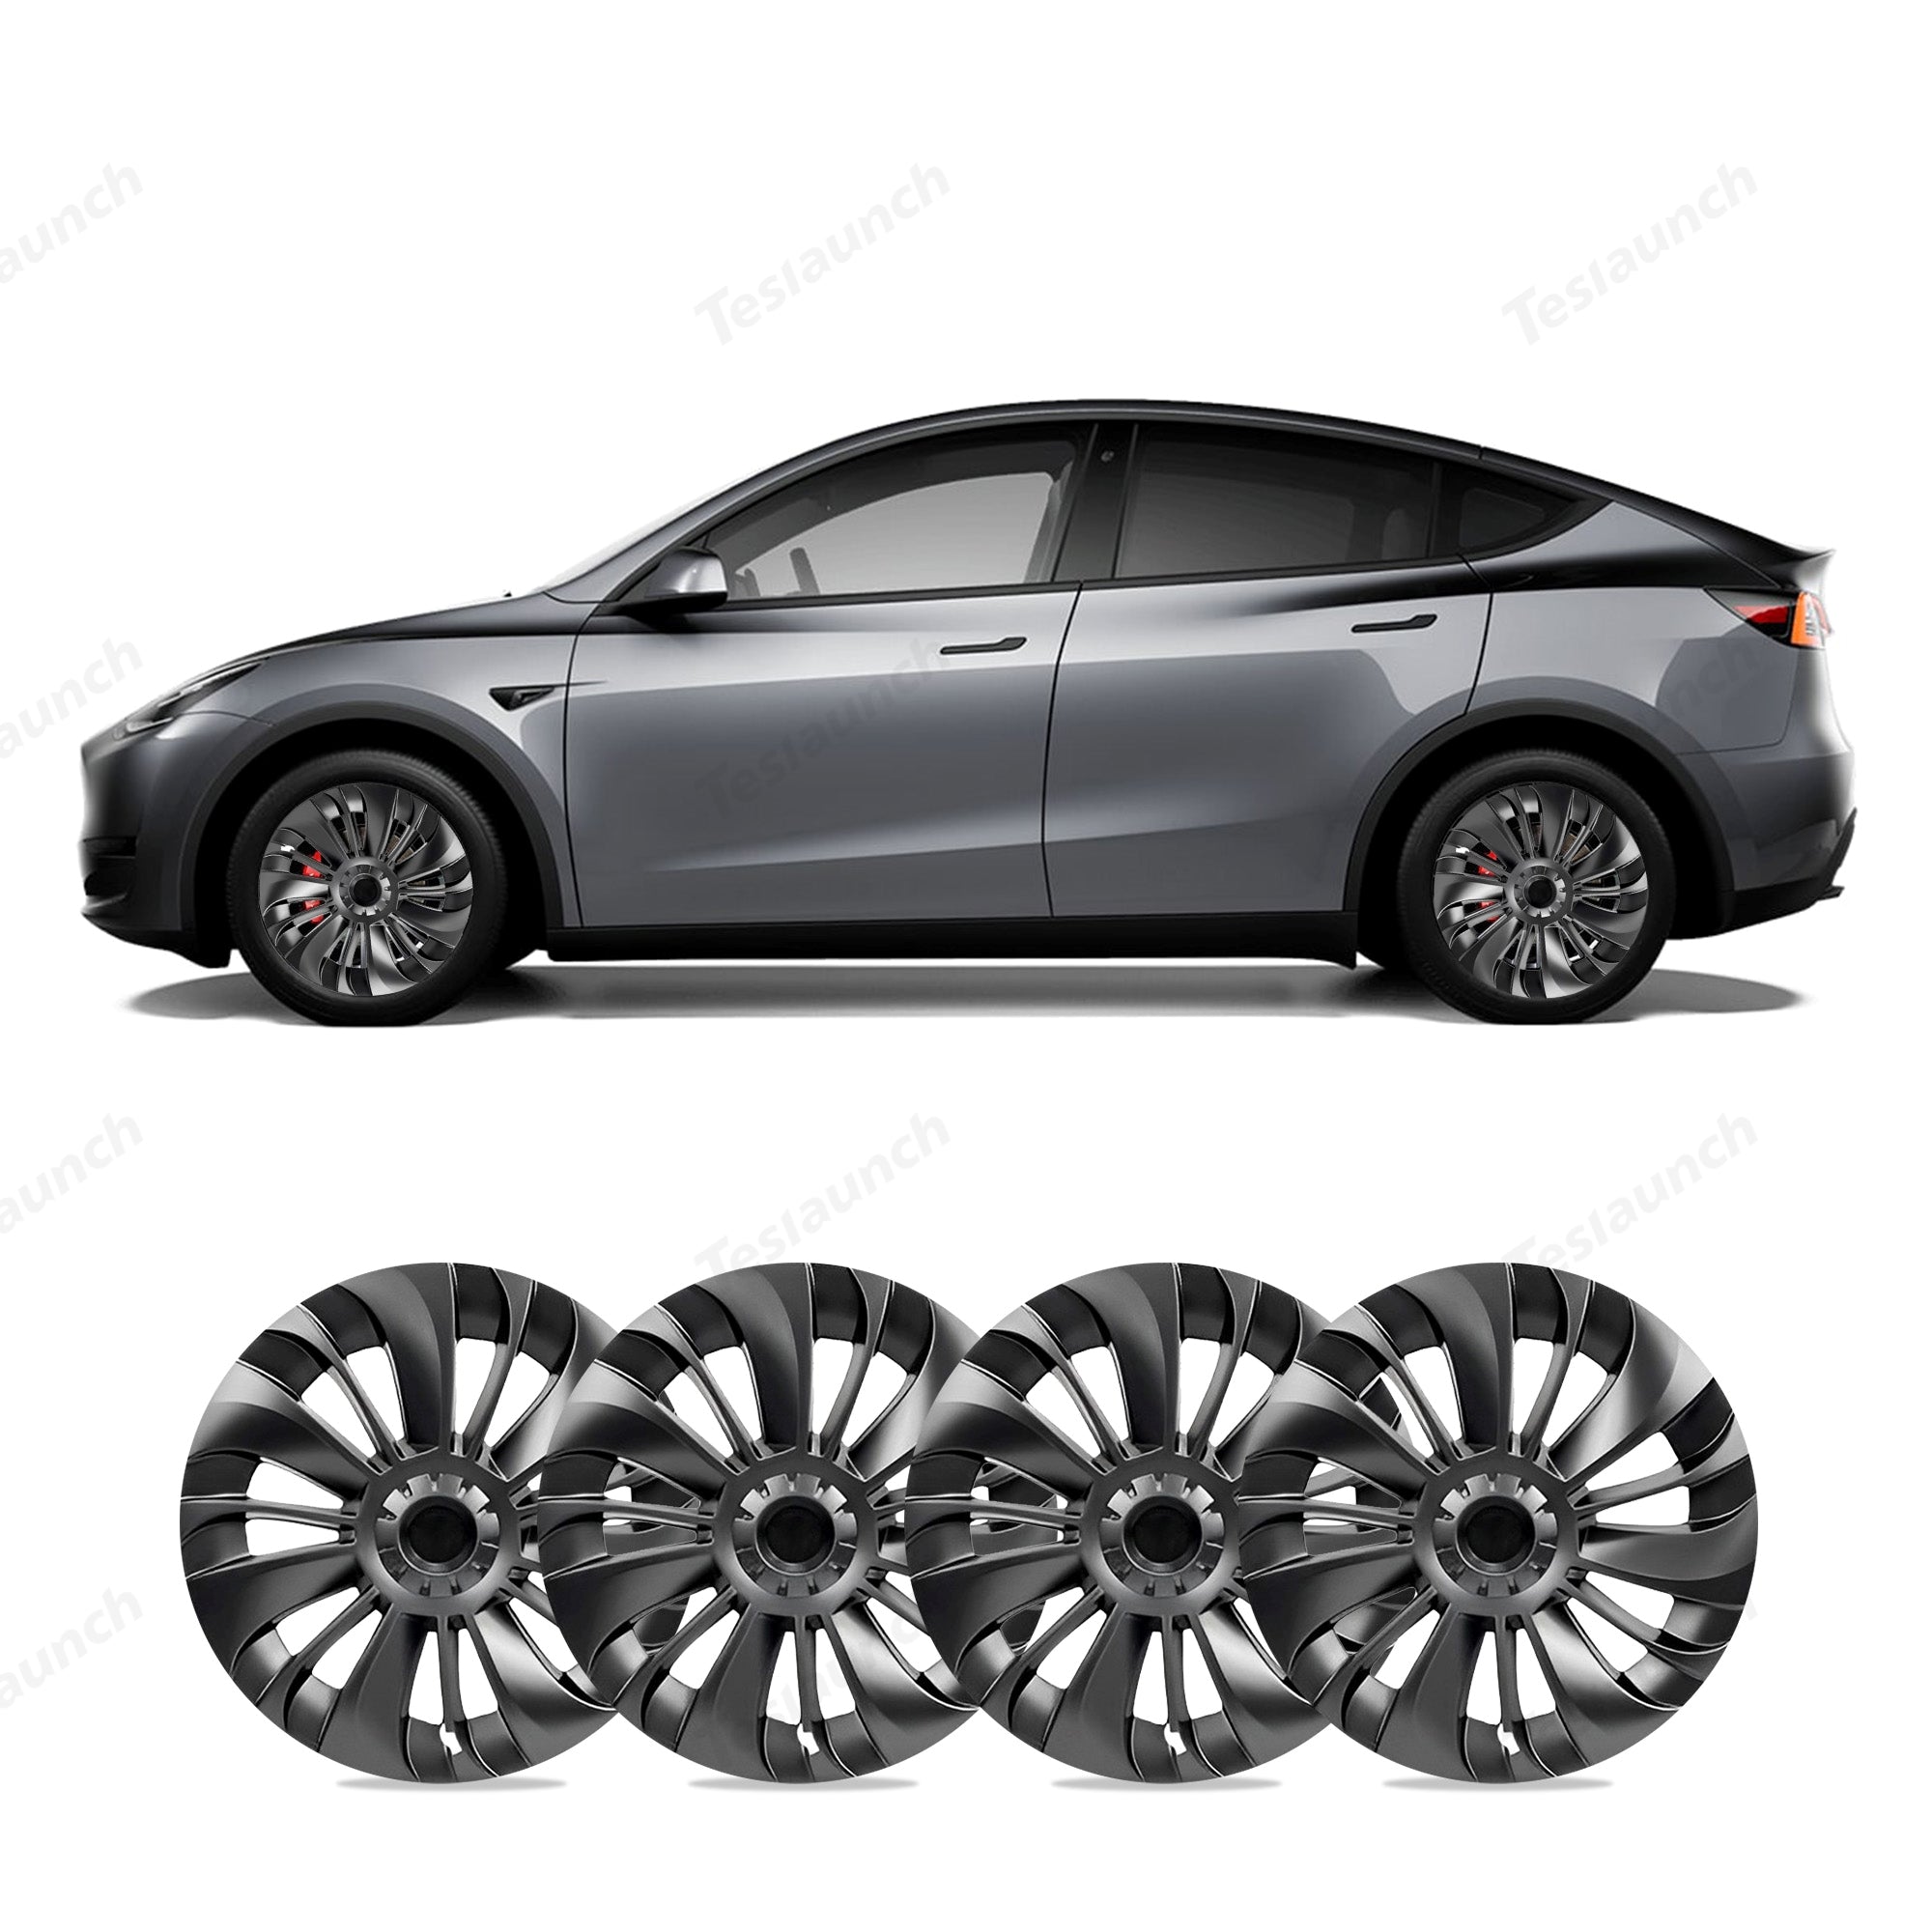 Model Y Hub Caps 4PCS Performance Replacement Wheel Cap 19 Inch Wheel Cover  For Tesla Model Y Full Cover Hubcap 2017-2023